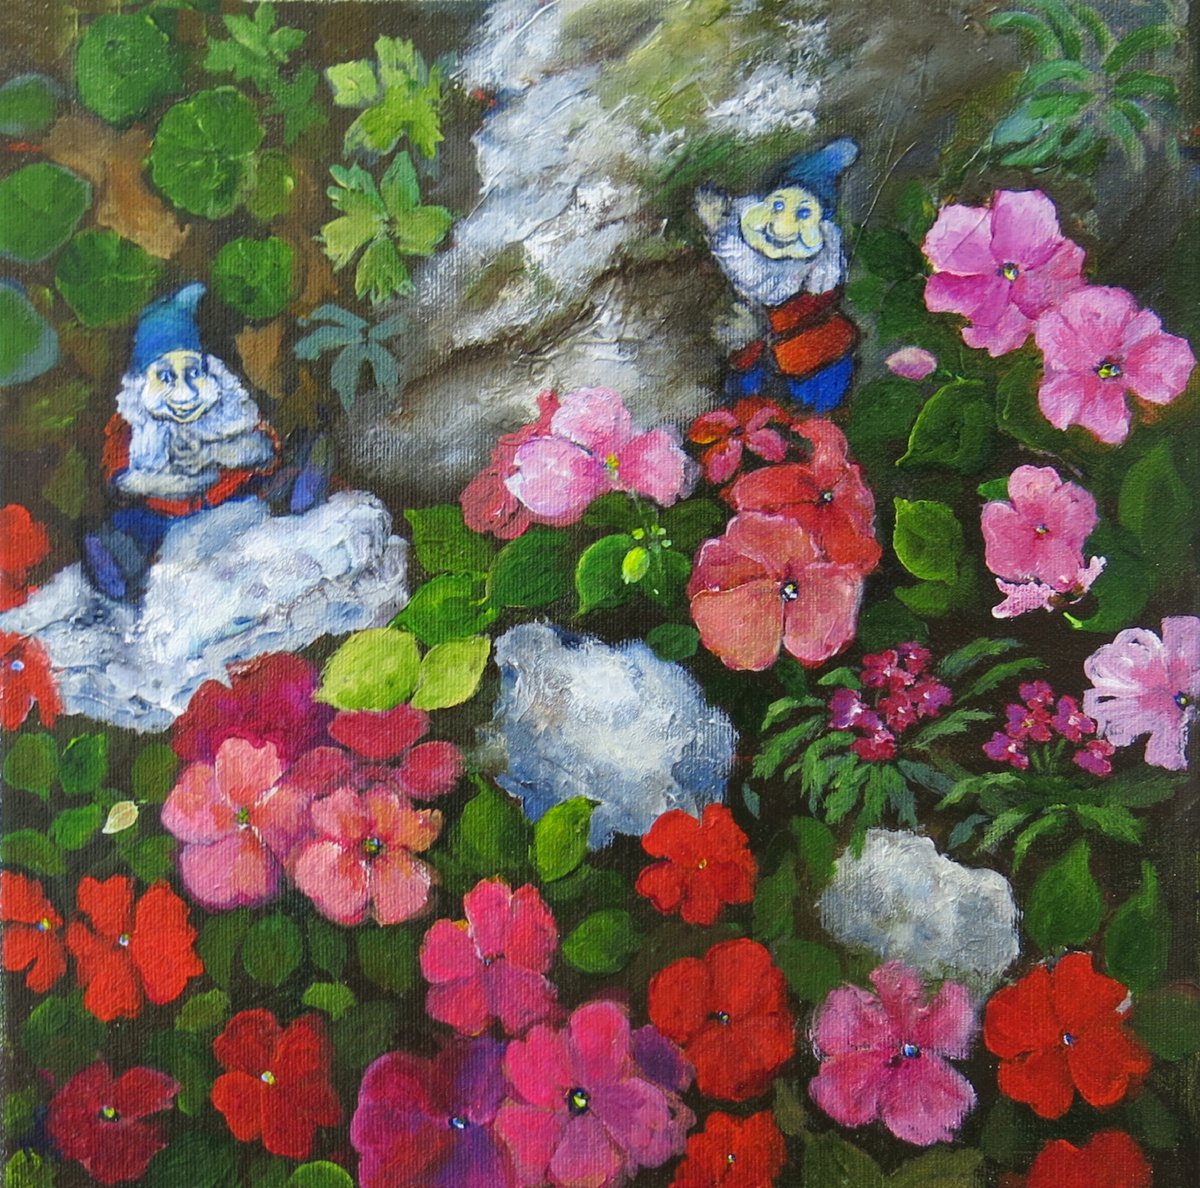 Gnomes and Busy Lizzies (a scene from my rockery garden) by Maureen Greenwood